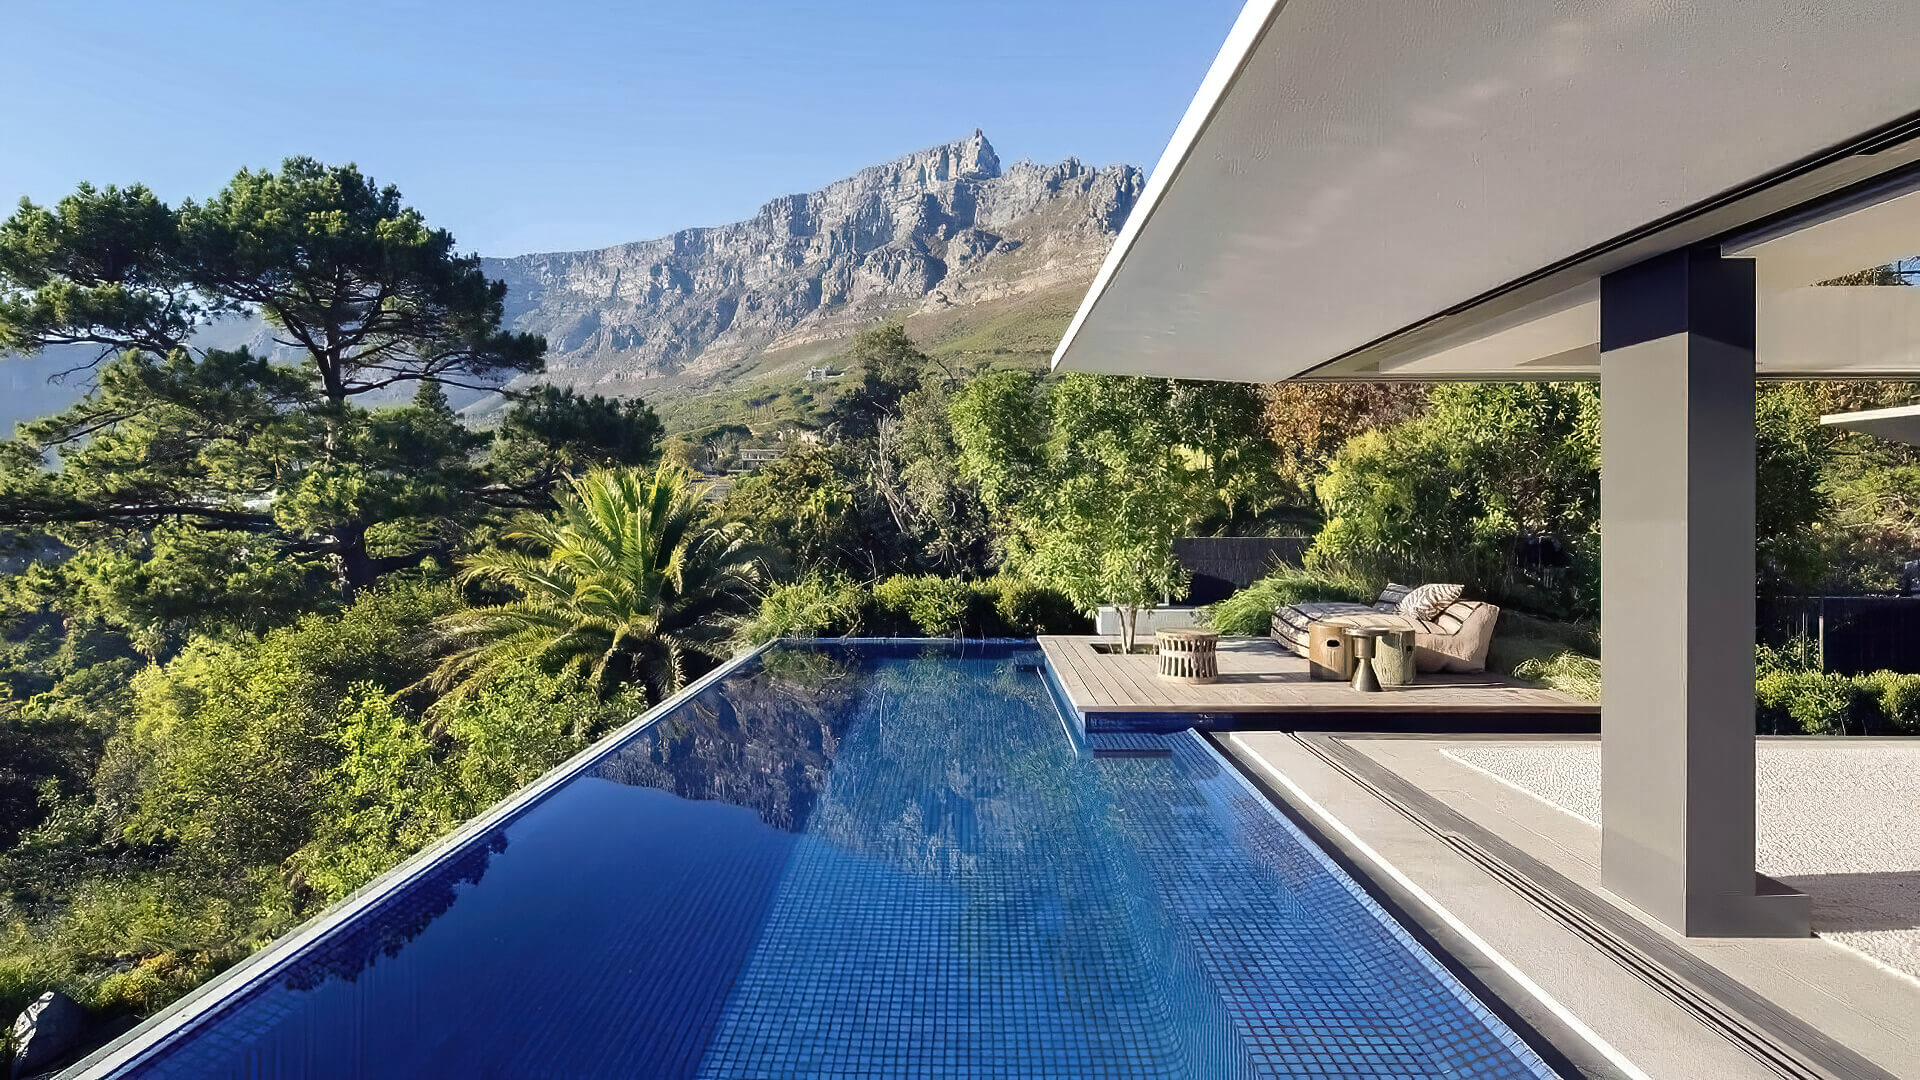 39 Amazing Above Ground Pool Ideas【2022】 ‐ The Pool Co